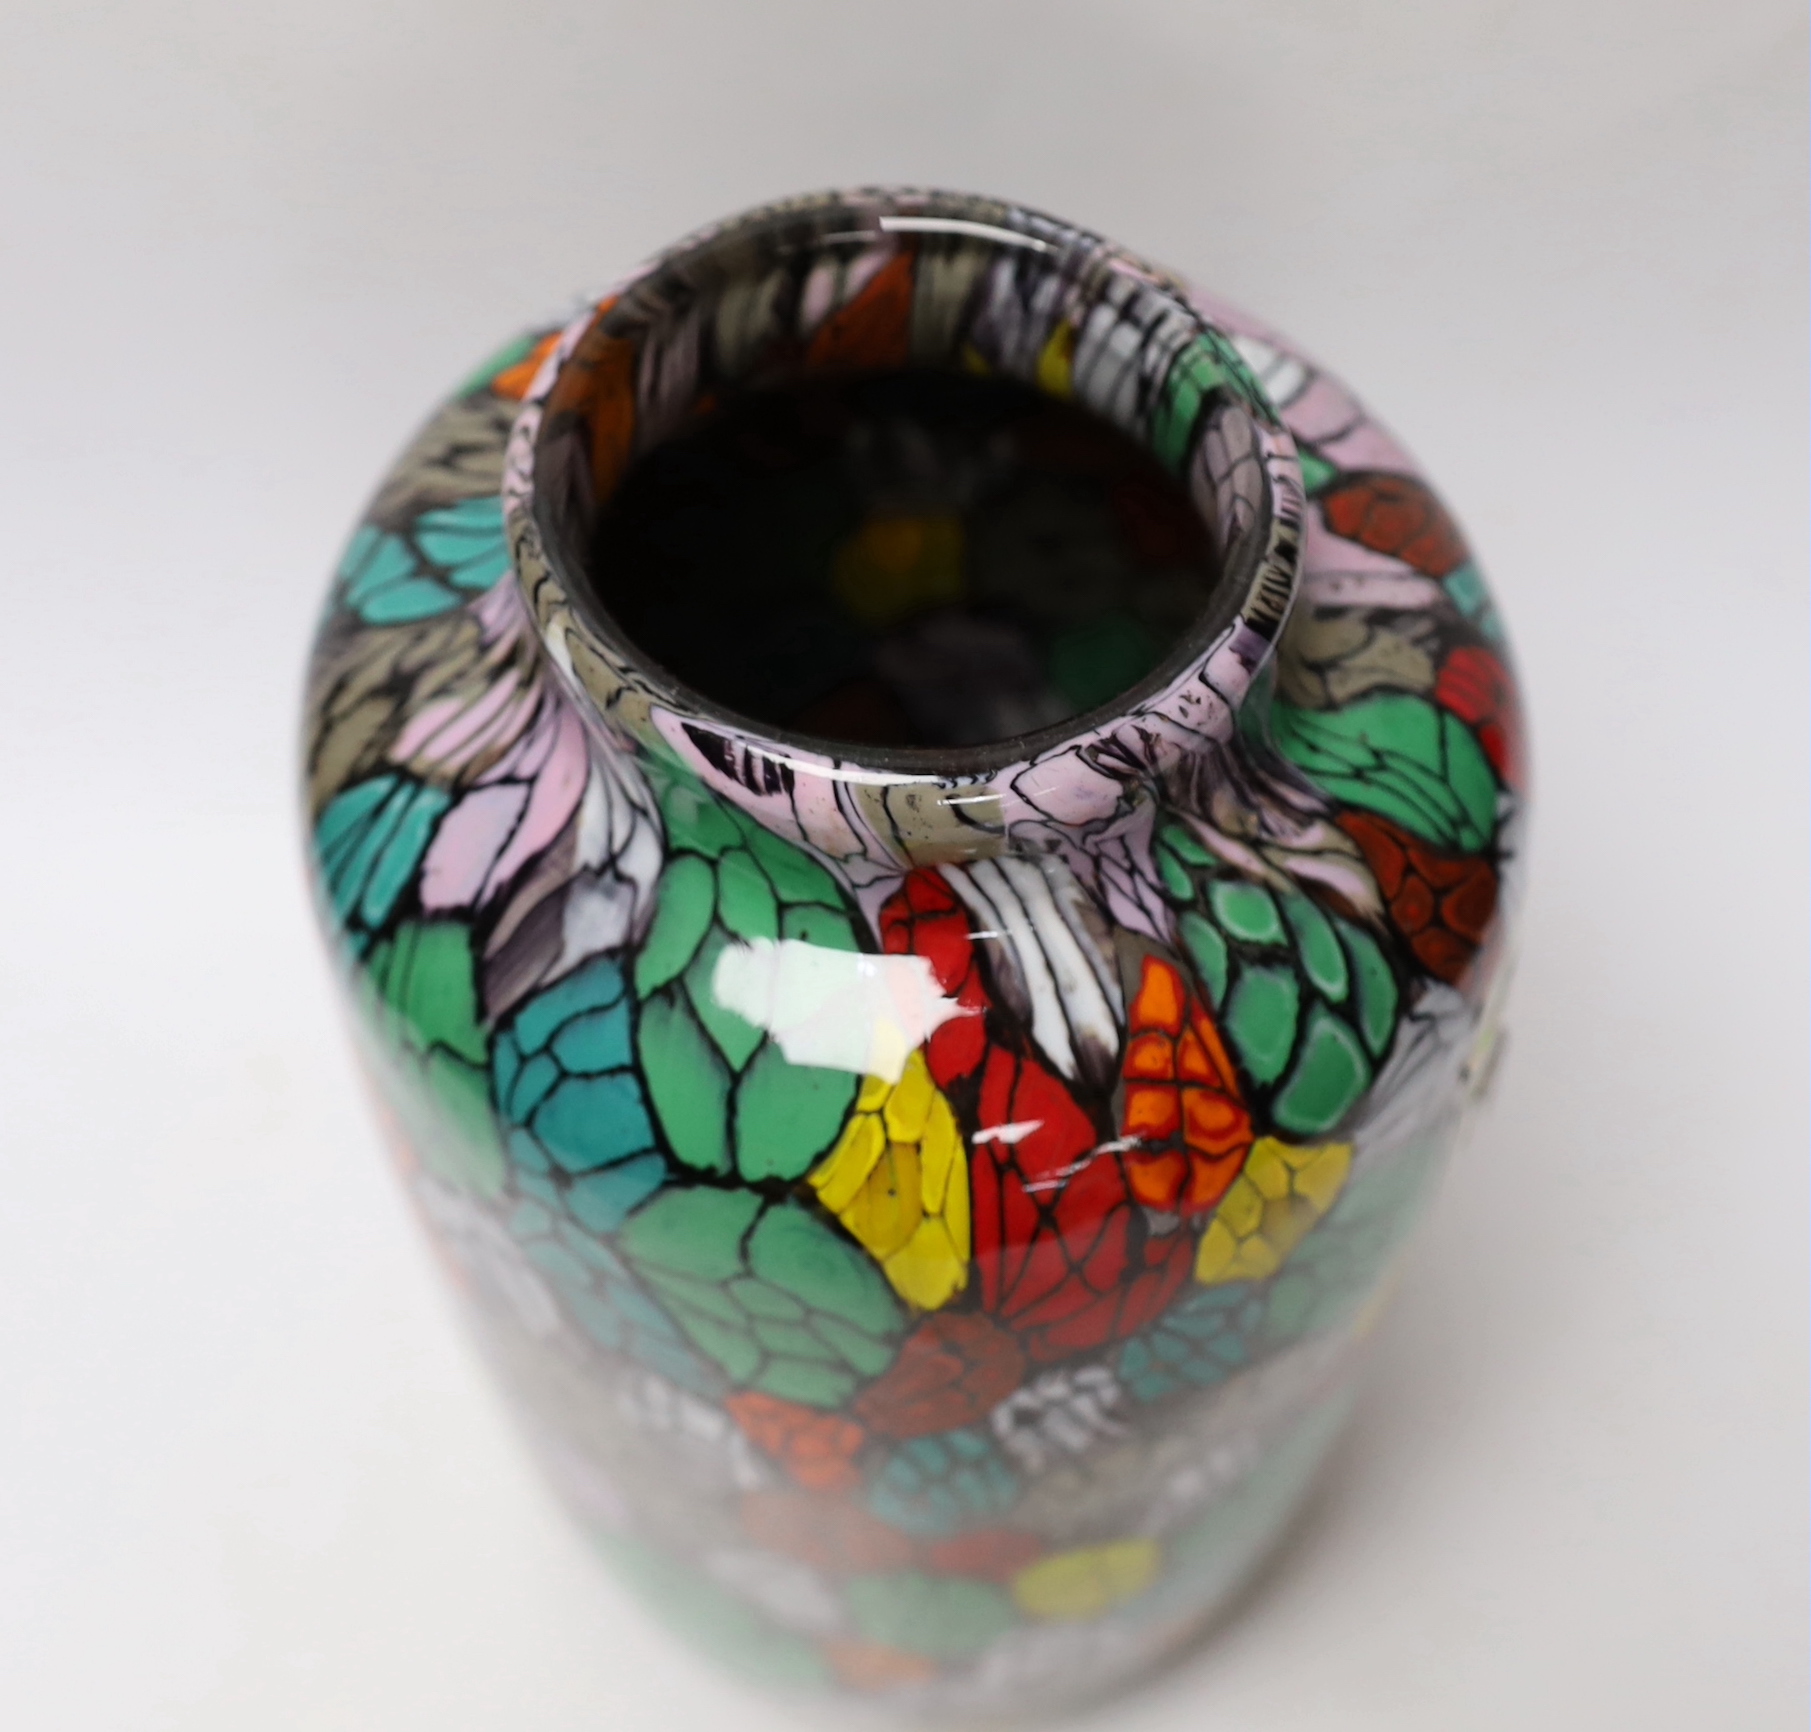 Vittorio Ferro (1932-2012) A Murano glass Murrine vase, with a multicoloured leaf design, signed, 27cm, Please note this lot attracts an additional import tax of 20% on the hammer price